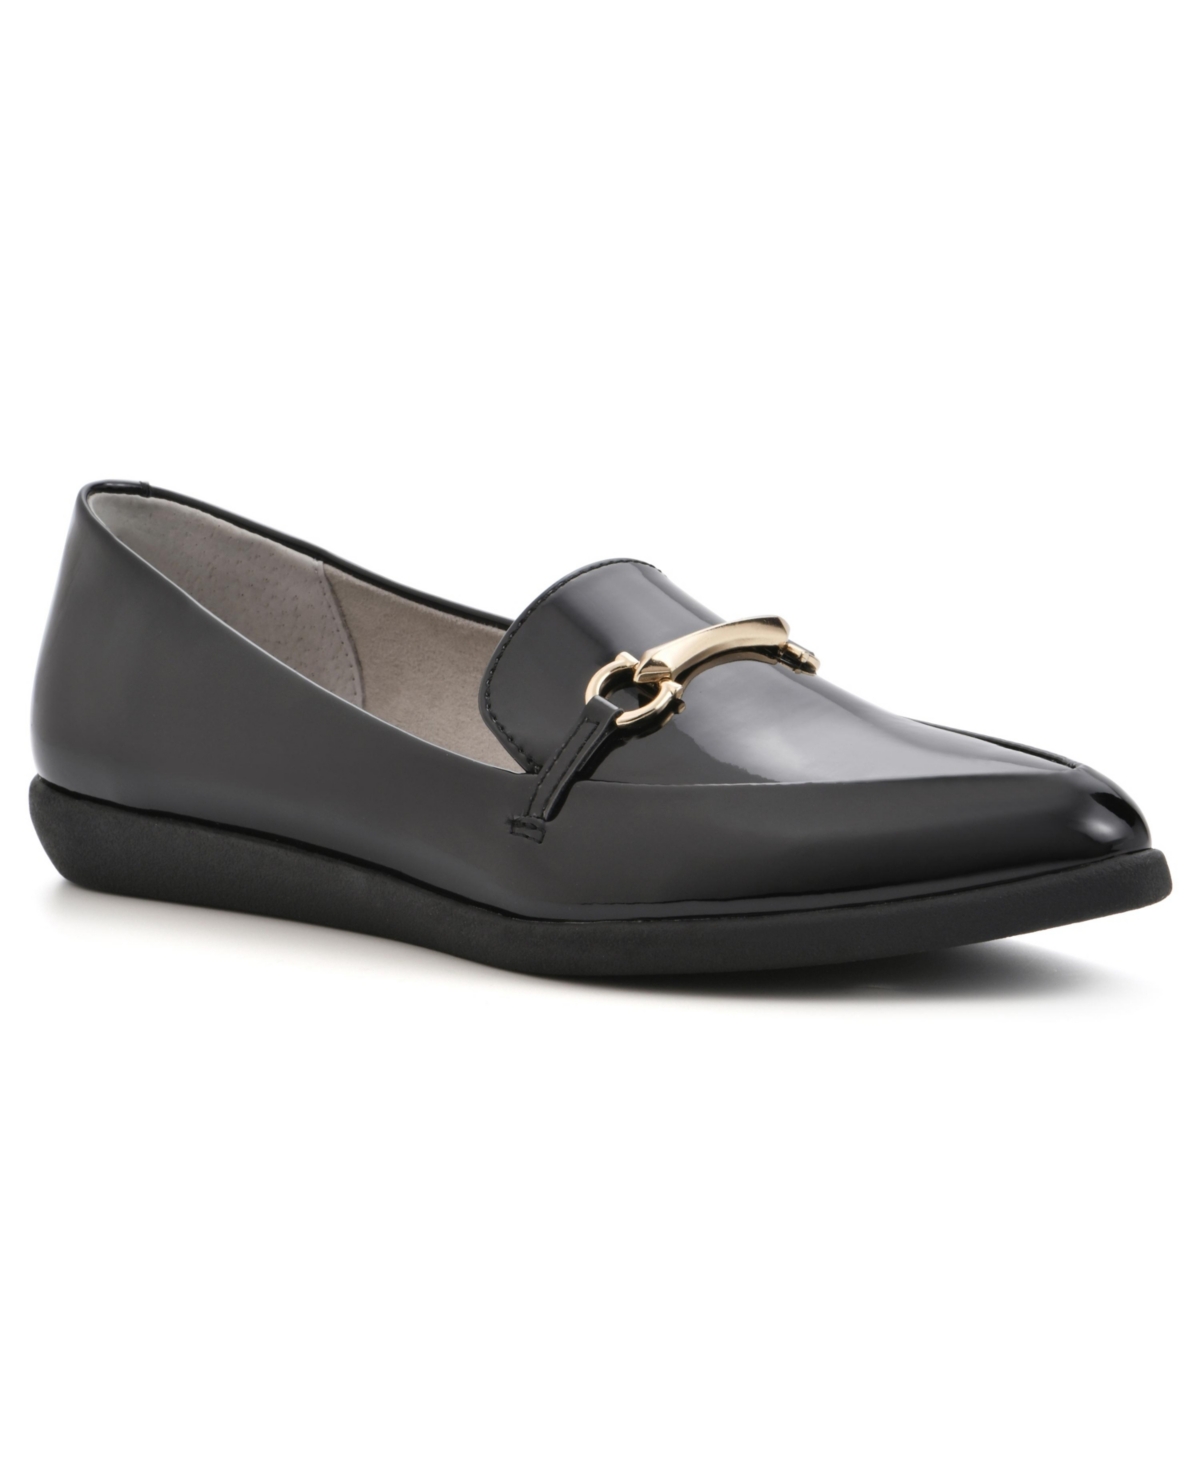 Women's Maria Loafers Shoe - Black Smooth